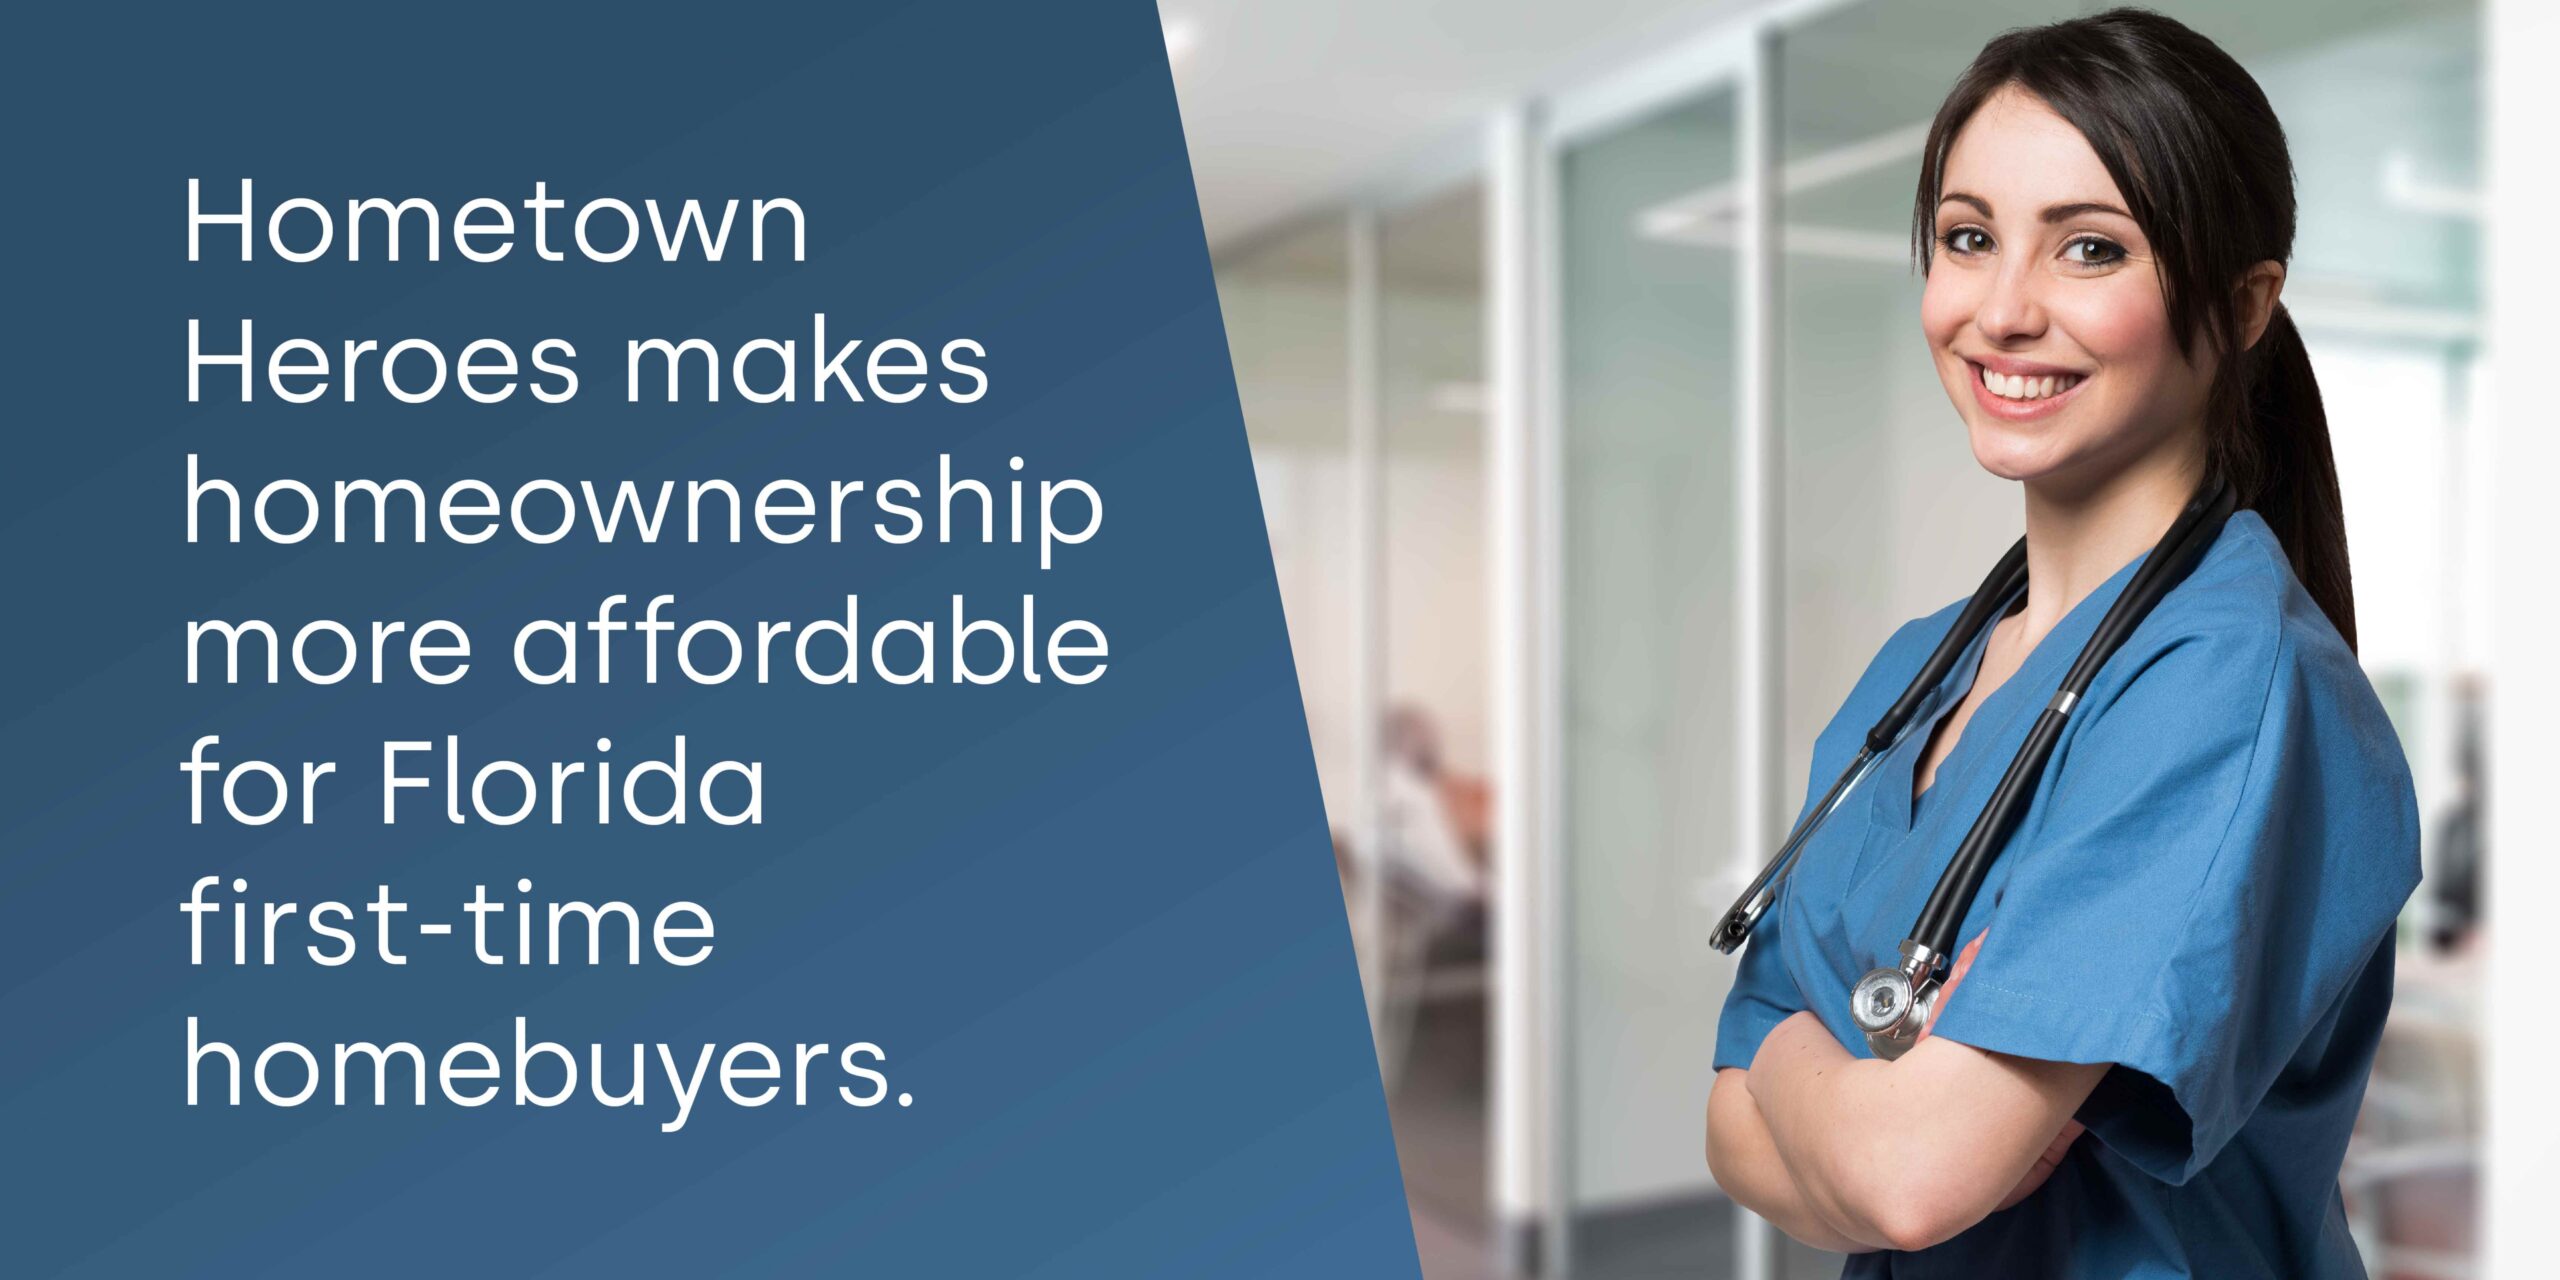 Hometown Heroes makes homeownership more affordable for Florida first-time homebuyers. - Image of a nurse